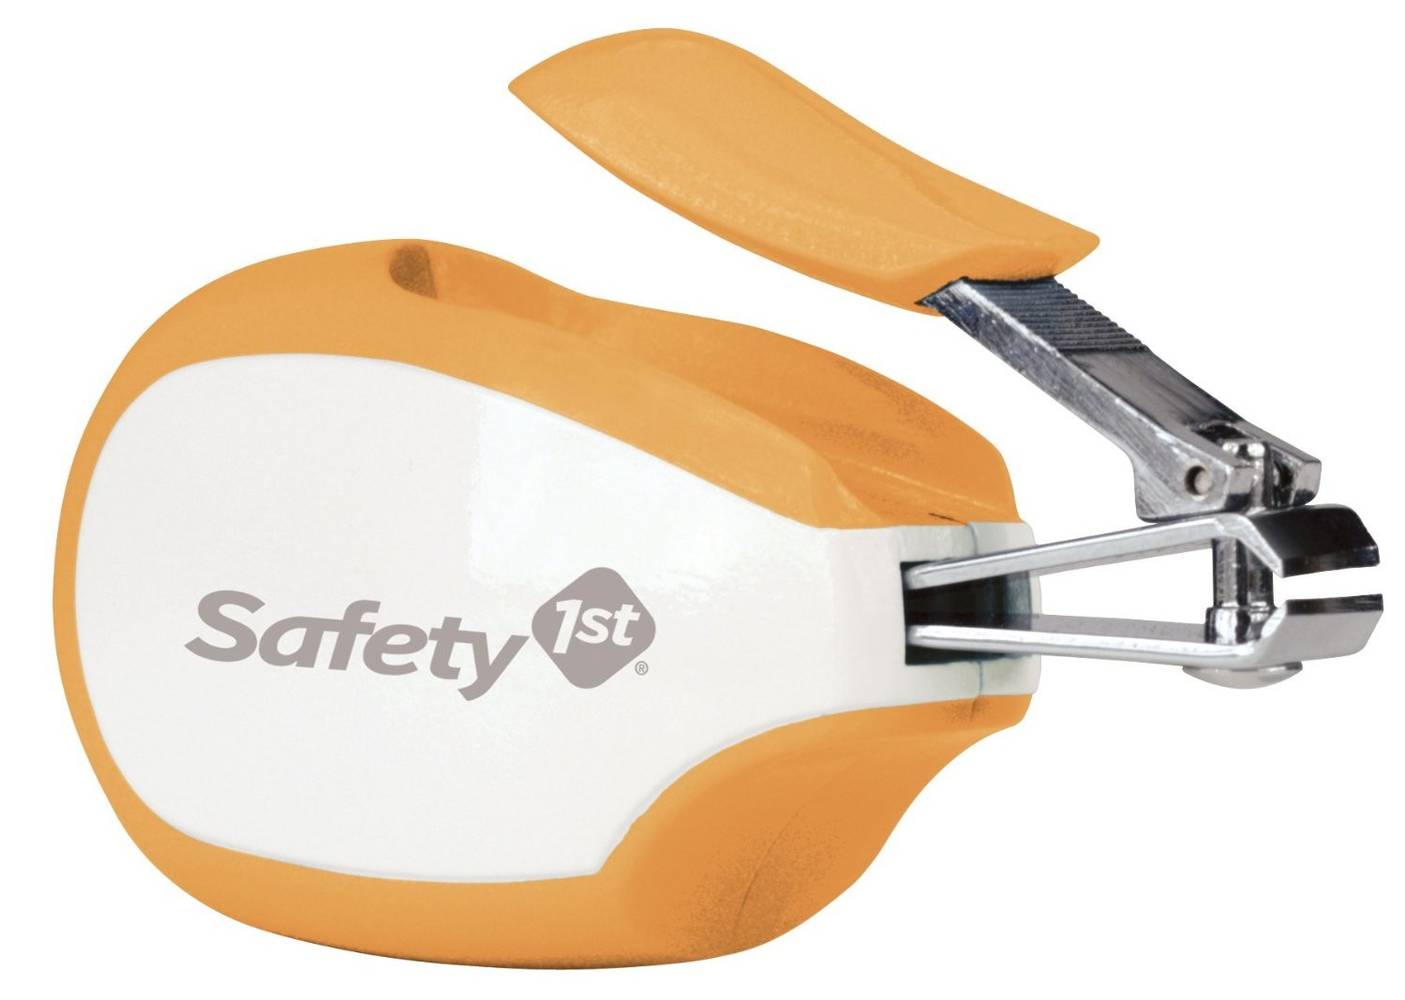 Safety 1st Hospital's Choice Steady Grip Nail Clippers (1 ct)